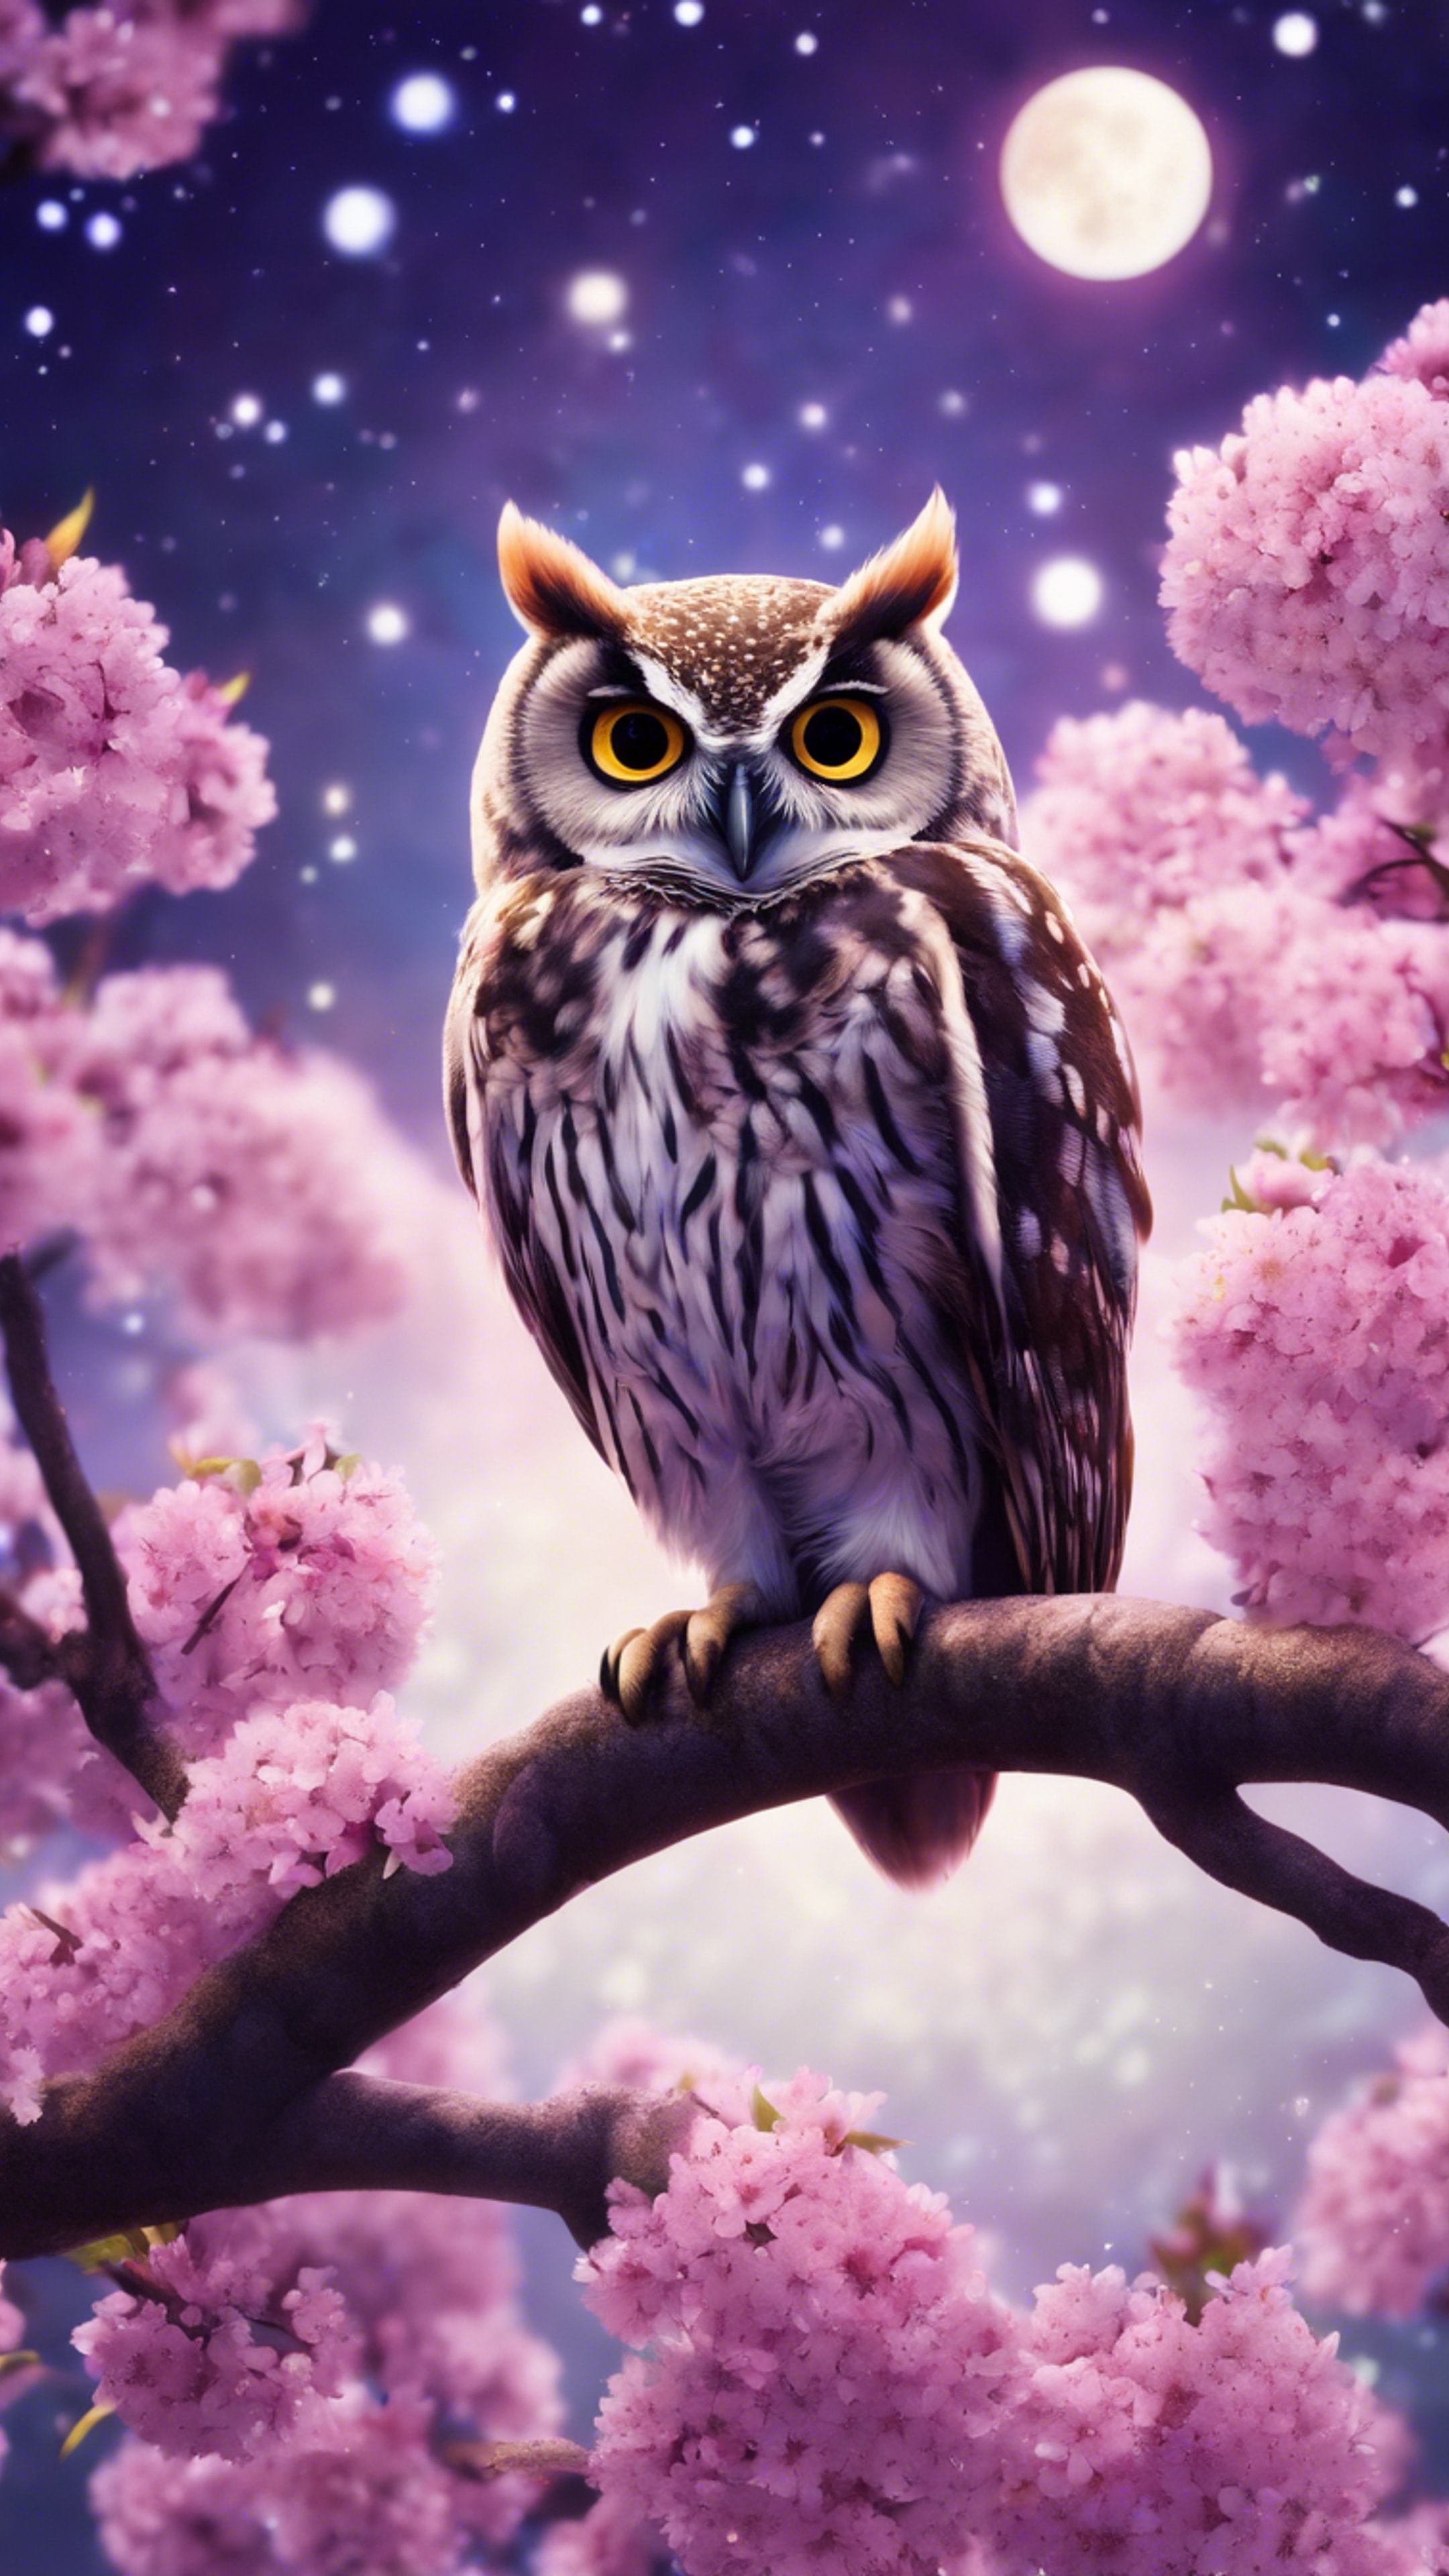 A cute kawaii style owl perched on a cherry blossom tree that blooms vibrant purple flowers, under a moonlit starry night. Дэлгэцийн зураг[d4c437875b7e43ac9353]